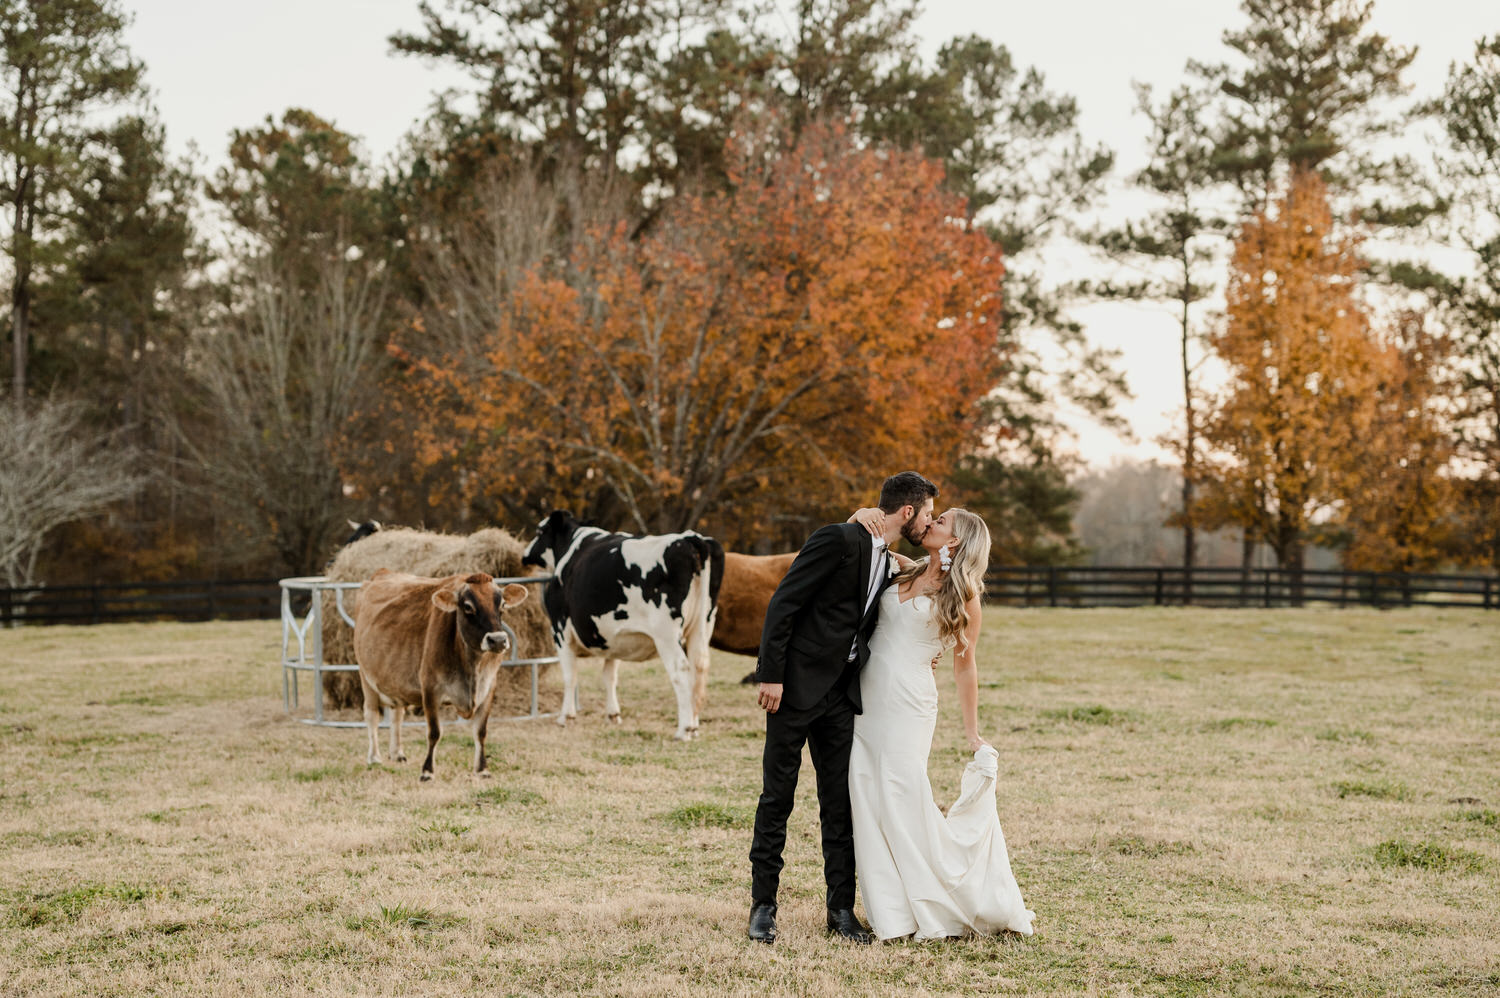 bride and groom kissing with cows in the background at Cherry Hollow Farm, a wedding venue in Georgia